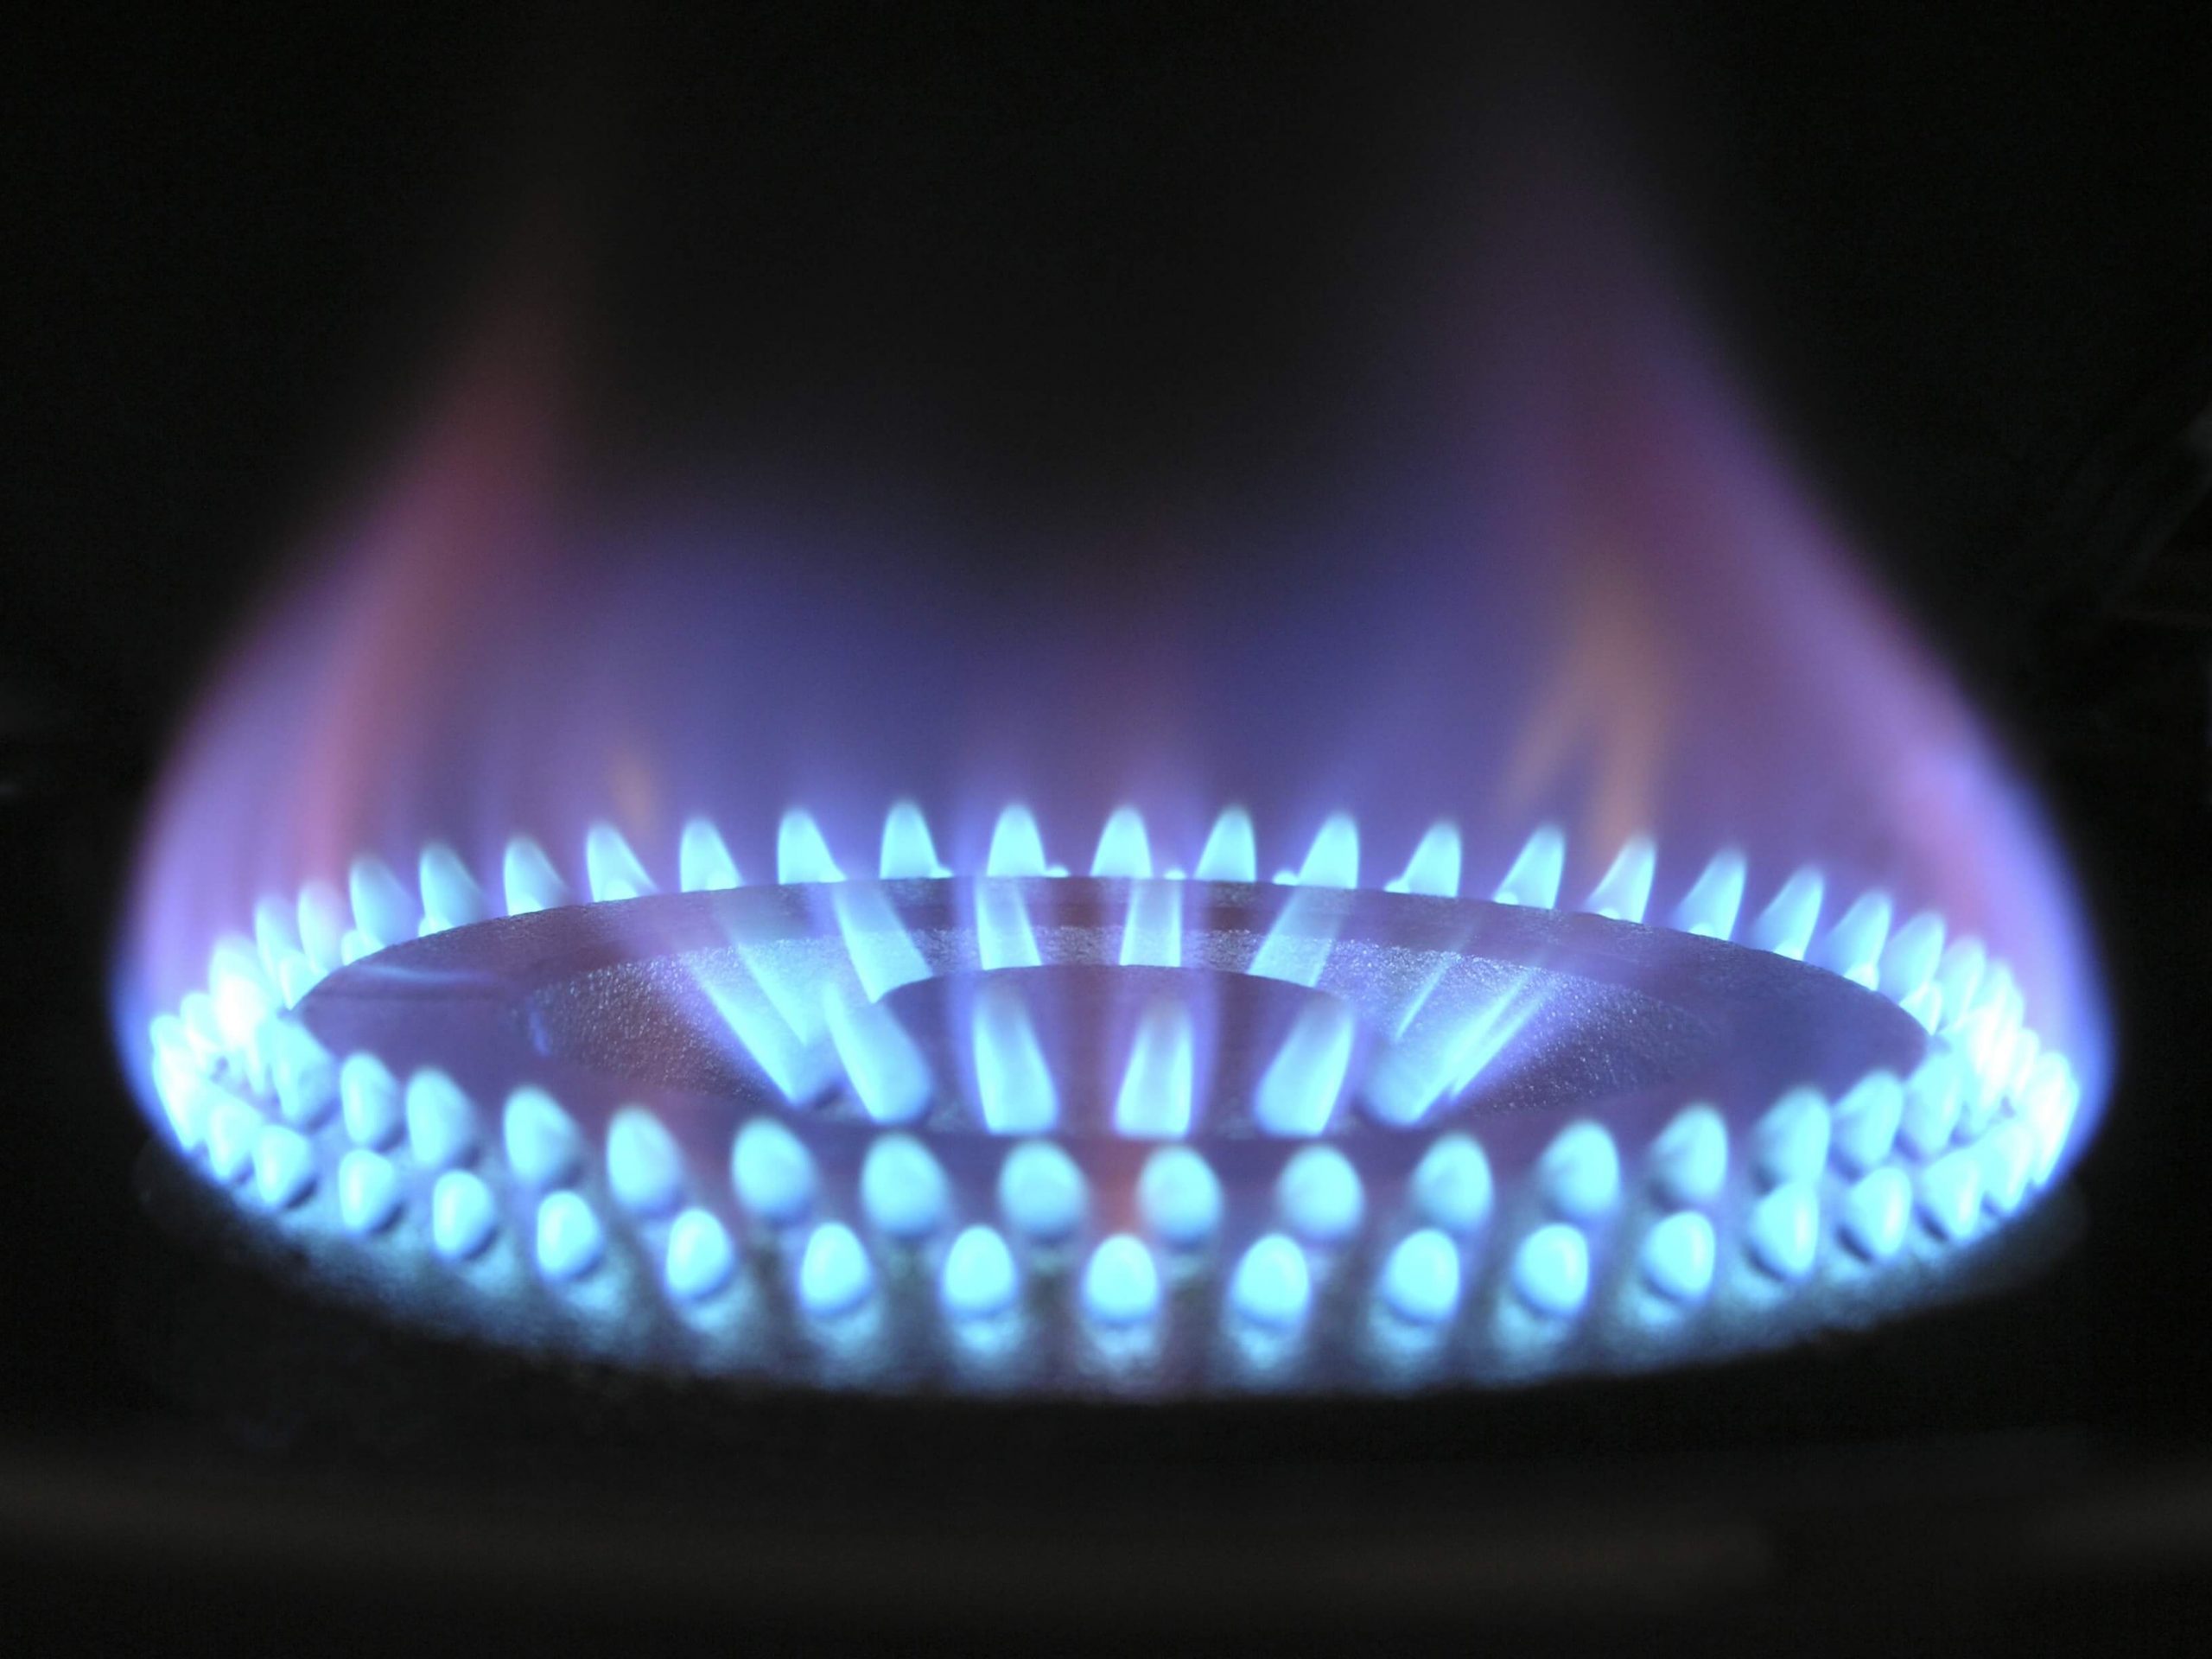 High Heating Bills? Apply for the Home Heating Credit